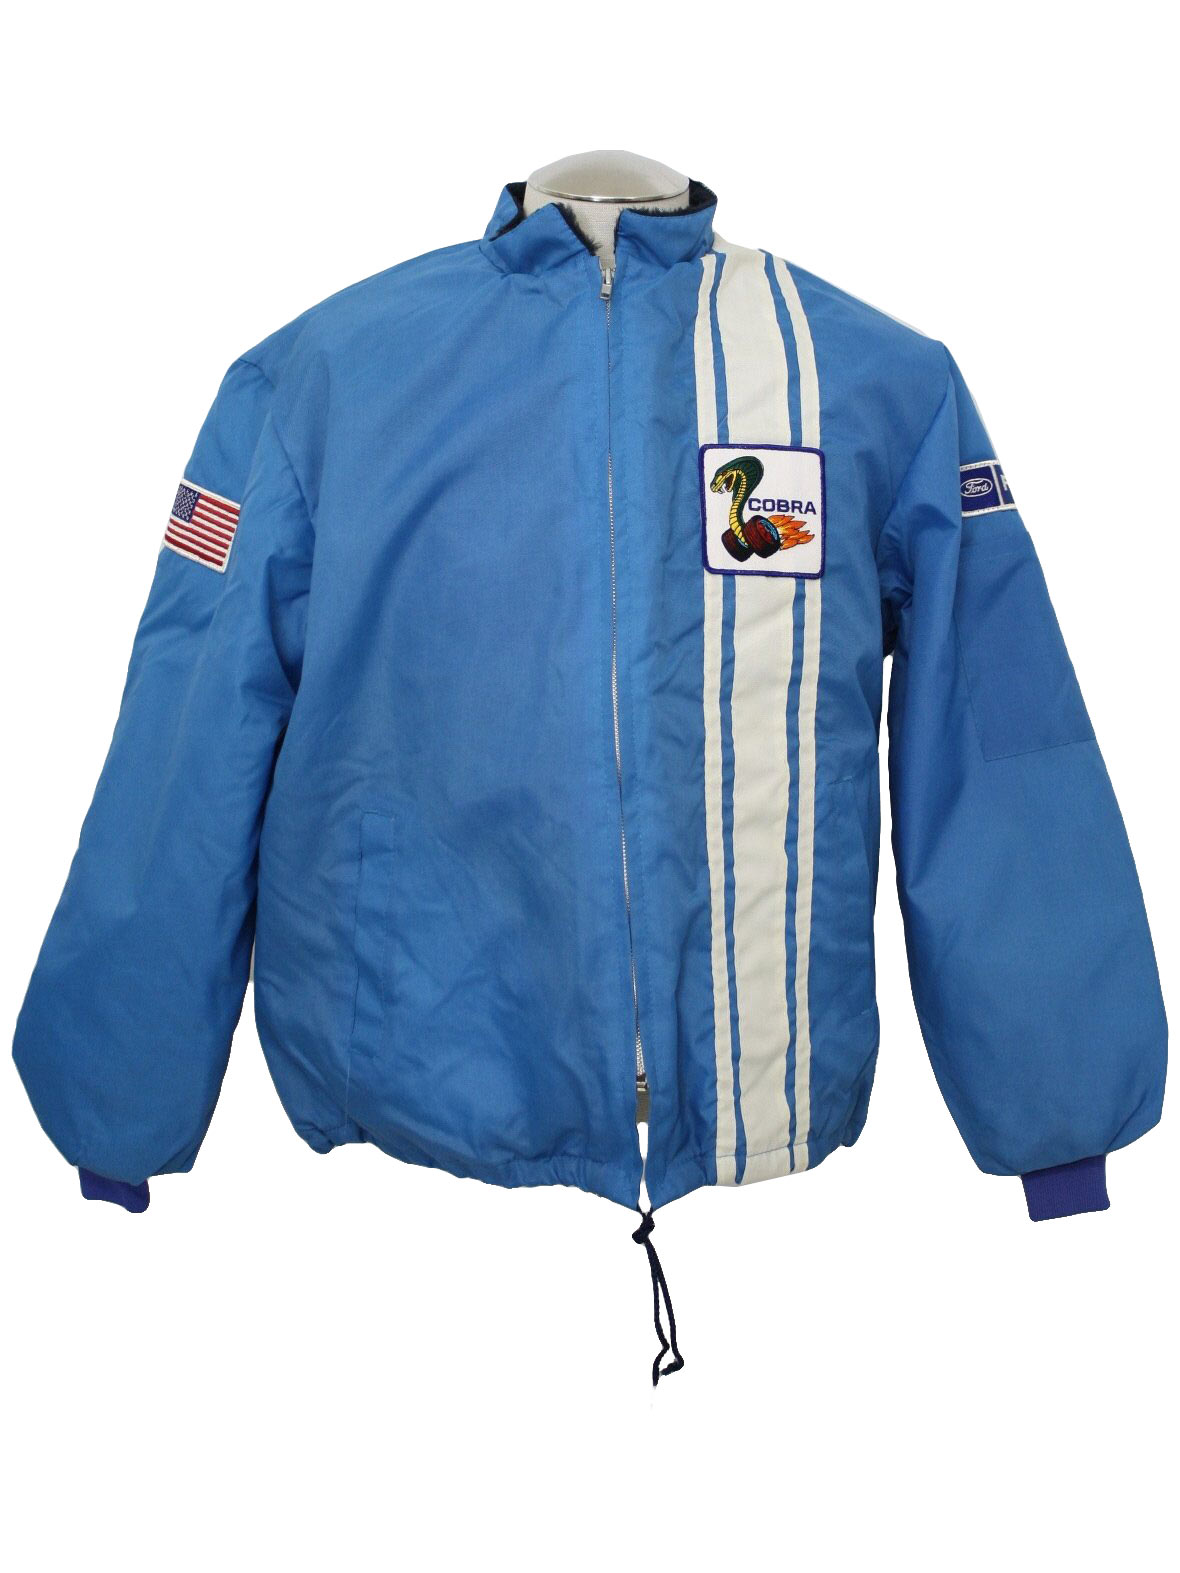 Ford racing jacket with cobra logo on it #3